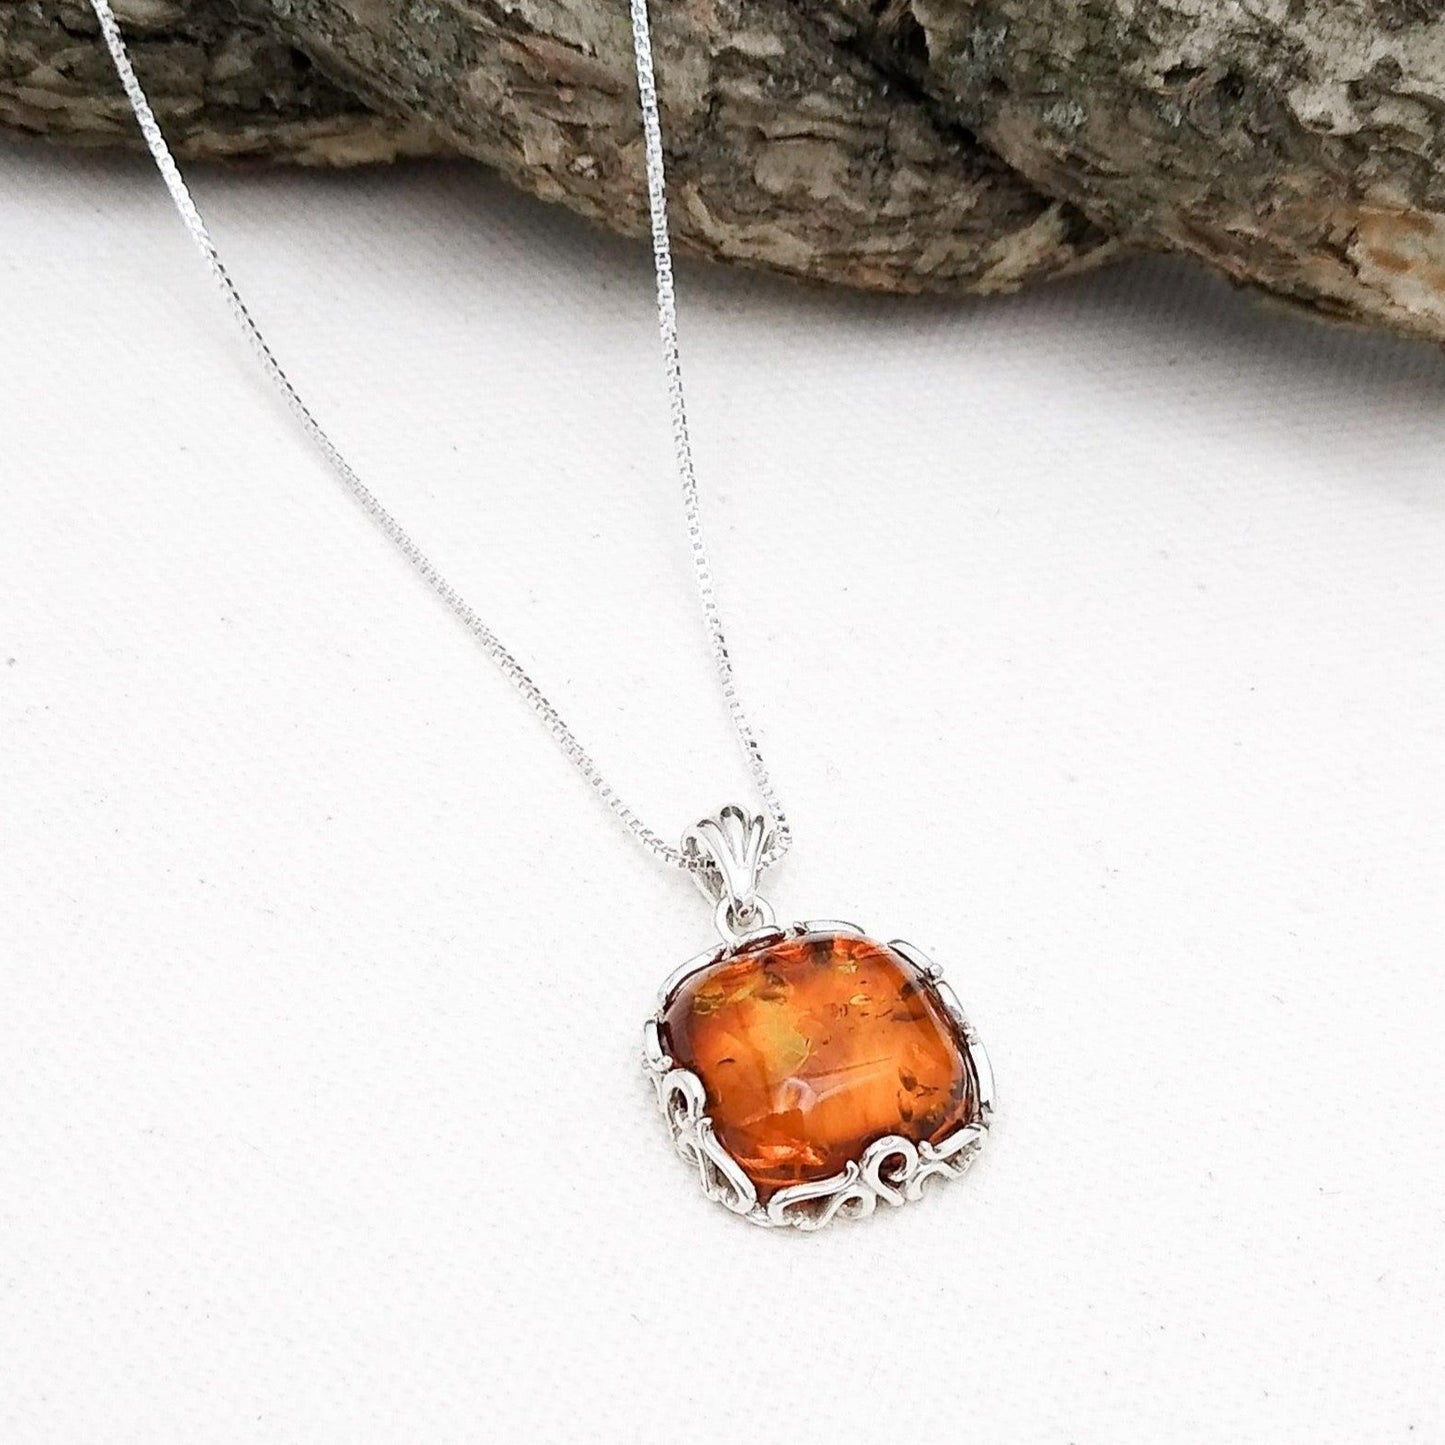 Sterling silver square pendant with an Amber in the middle, surrounded by an ornate sterling border. 18-inch sterling chain